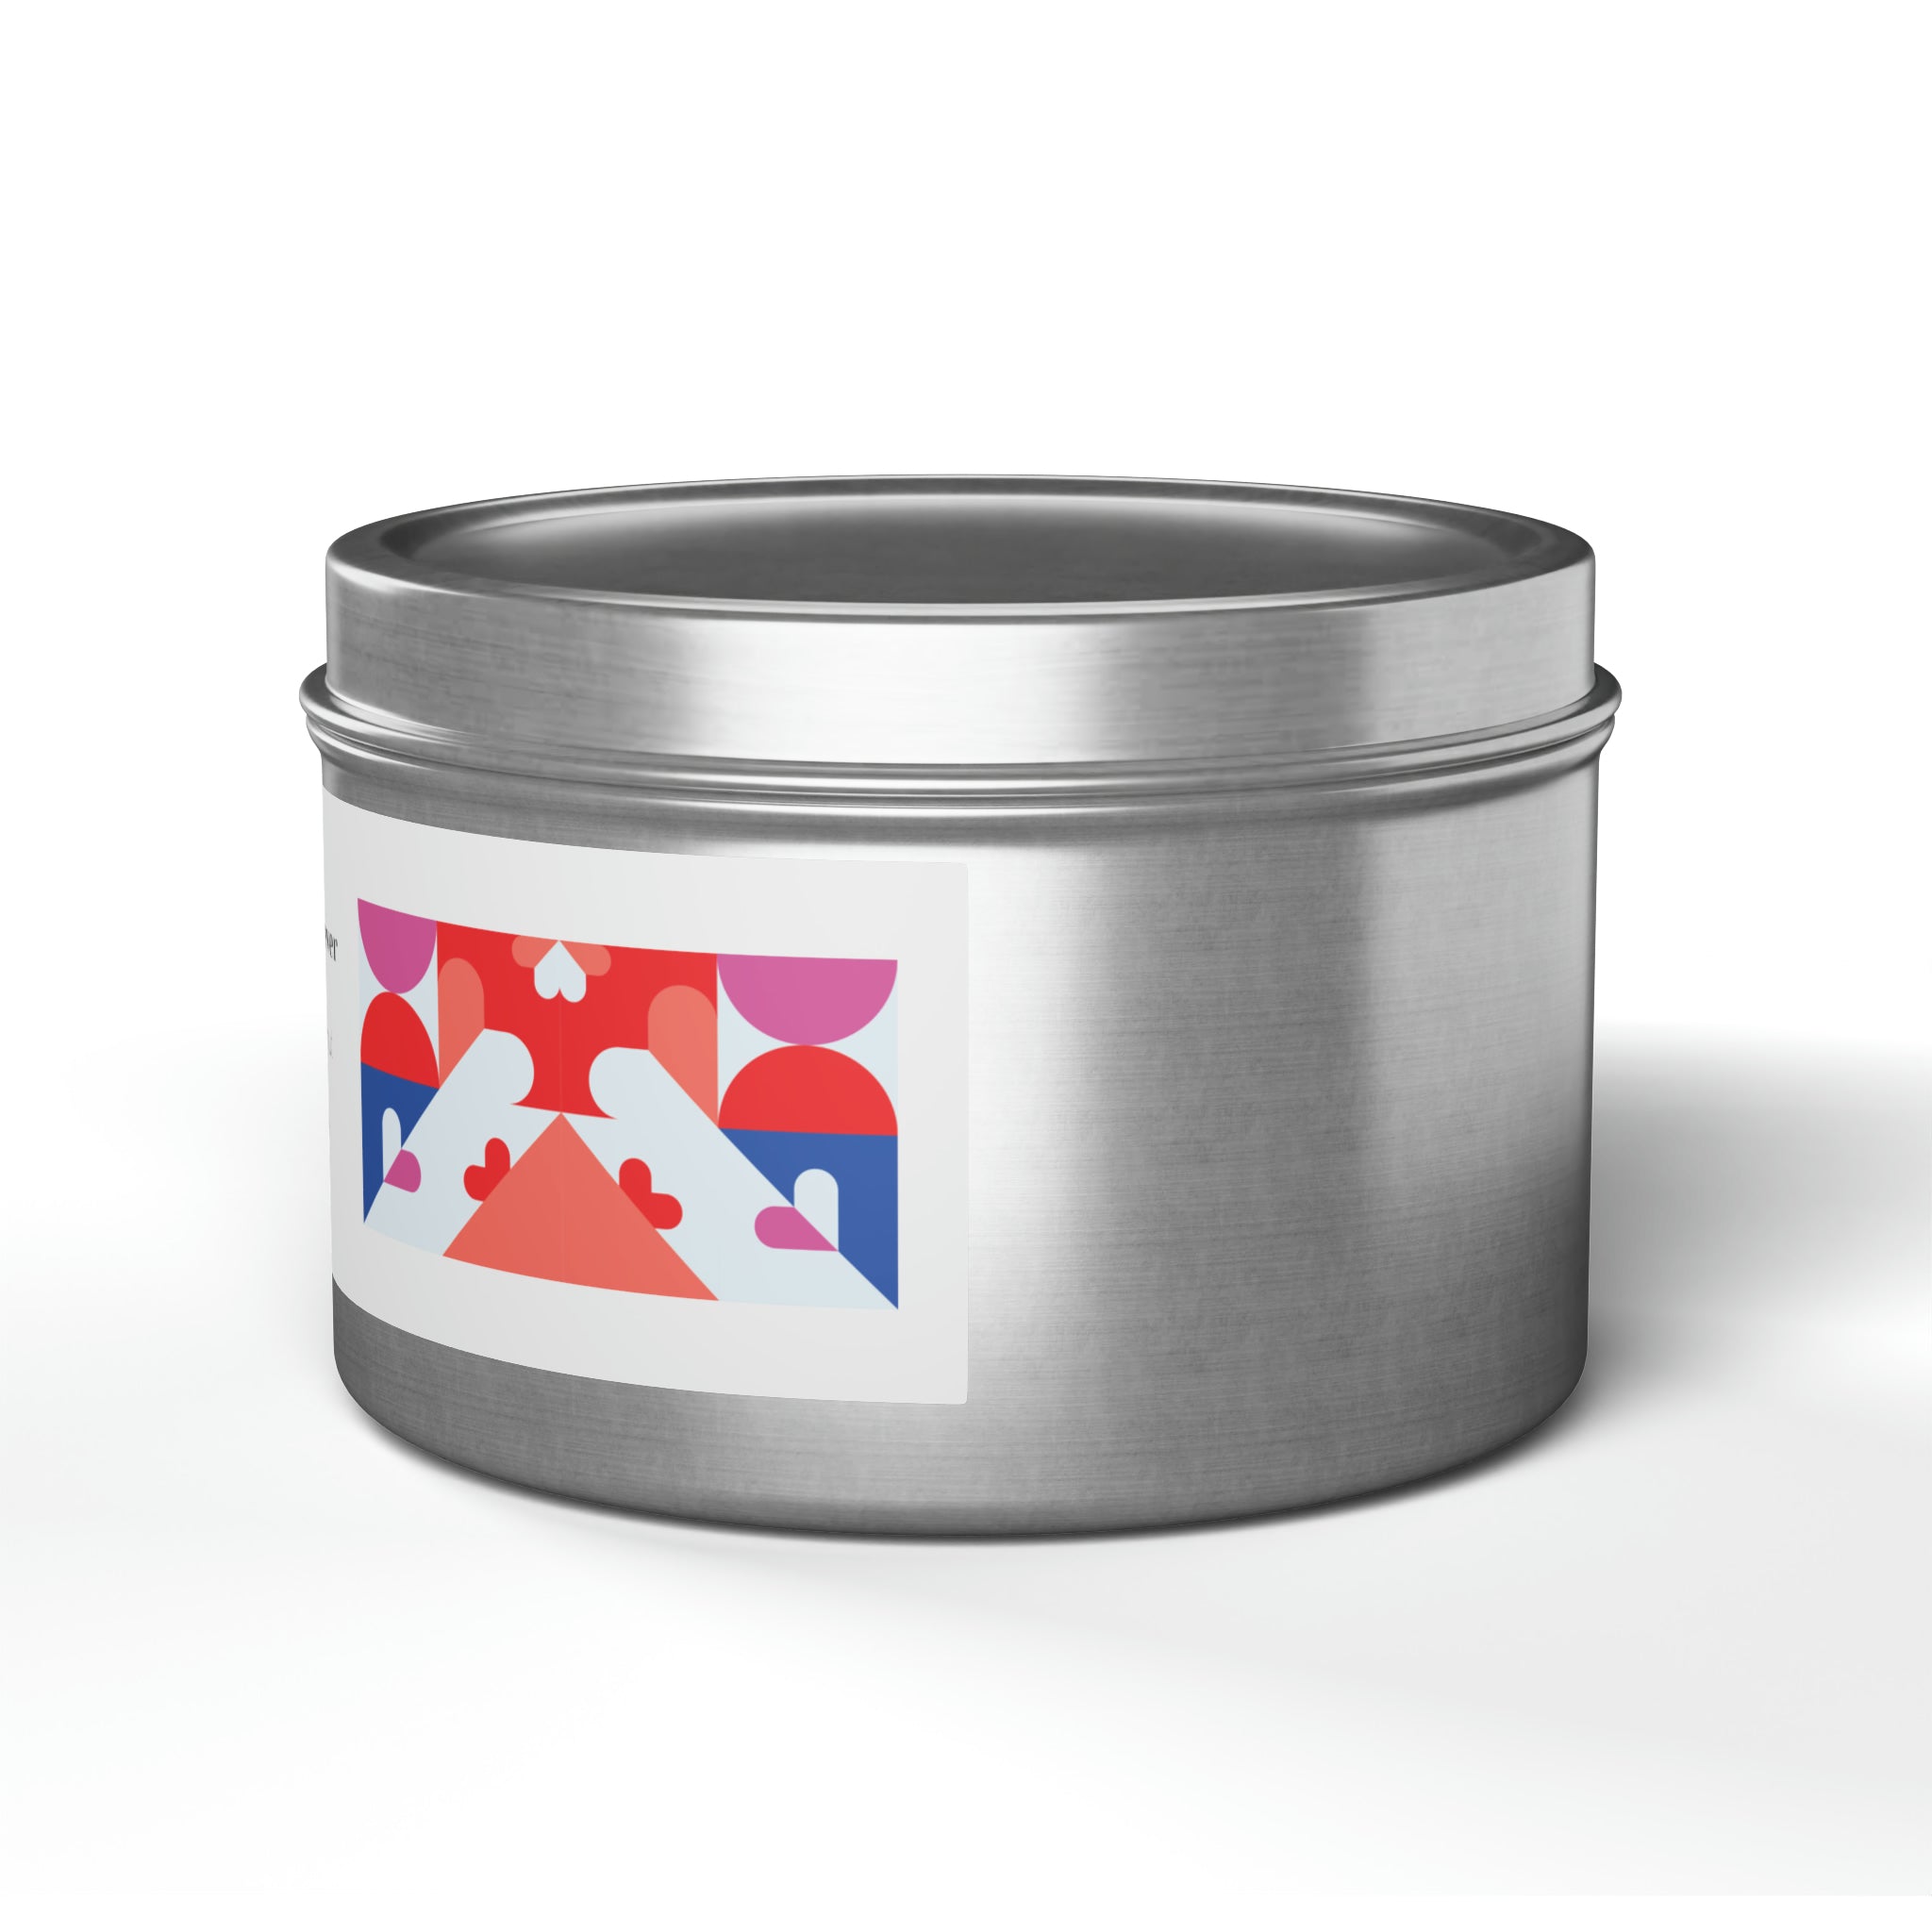 Mango coconut Always & Forever Soy base candle love, valentine's day gift Tin Candles-64